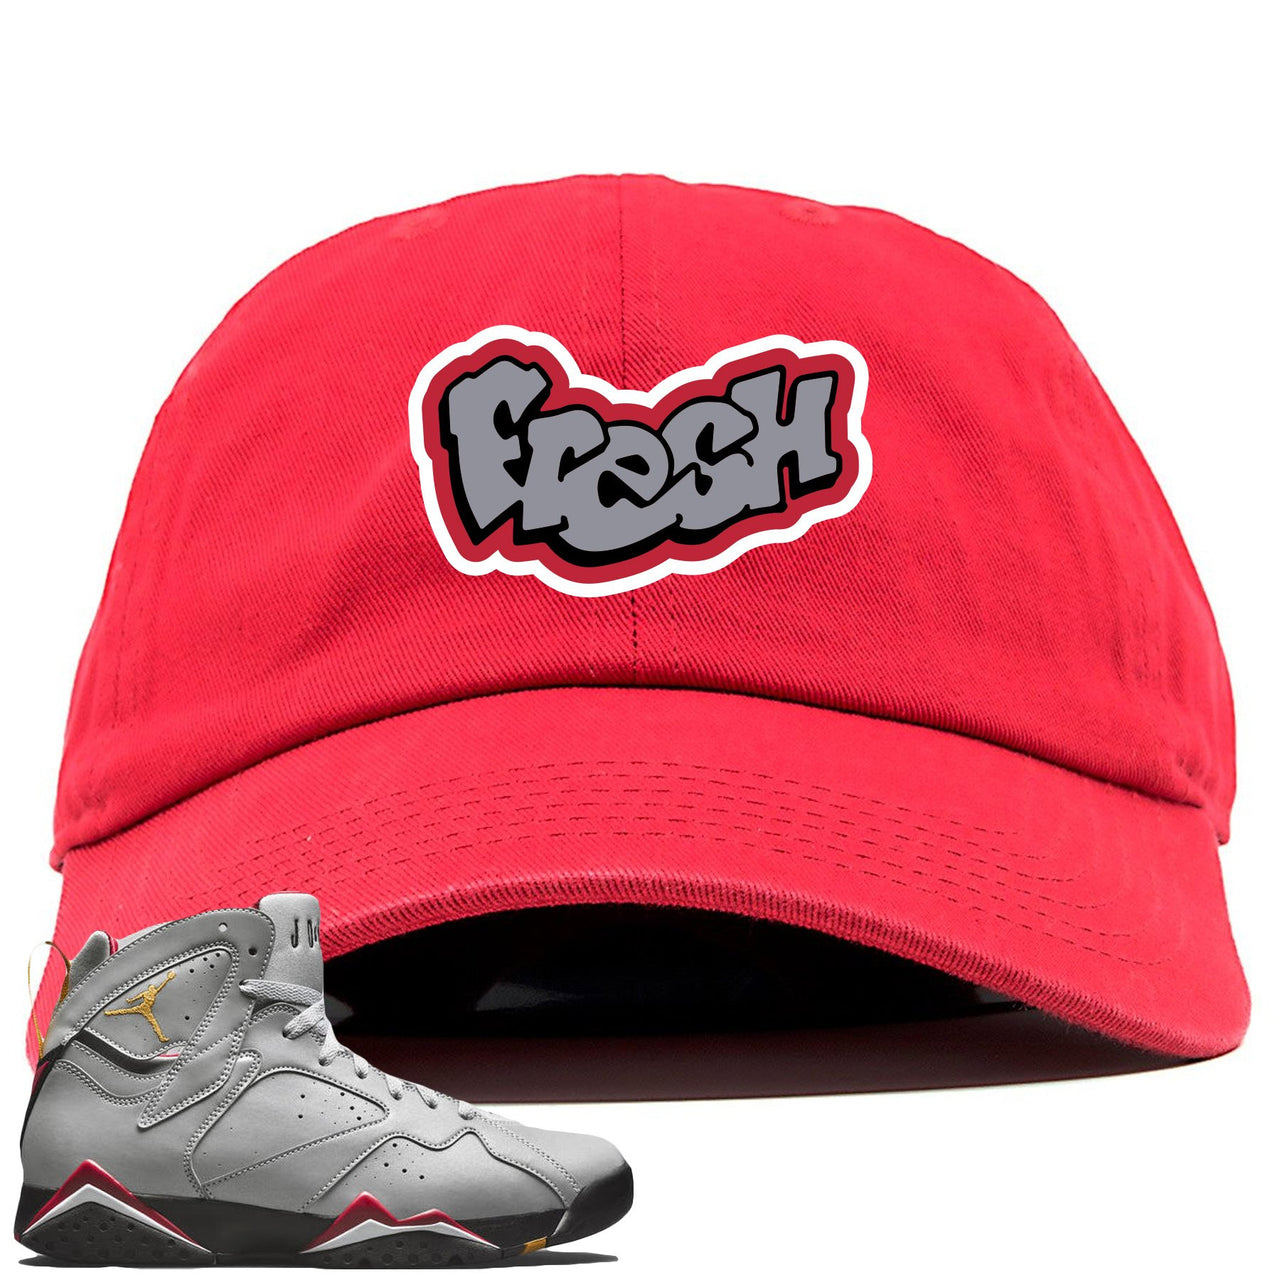 Reflections of a Champion 7s Dad Hat | Fresh Logo, Red